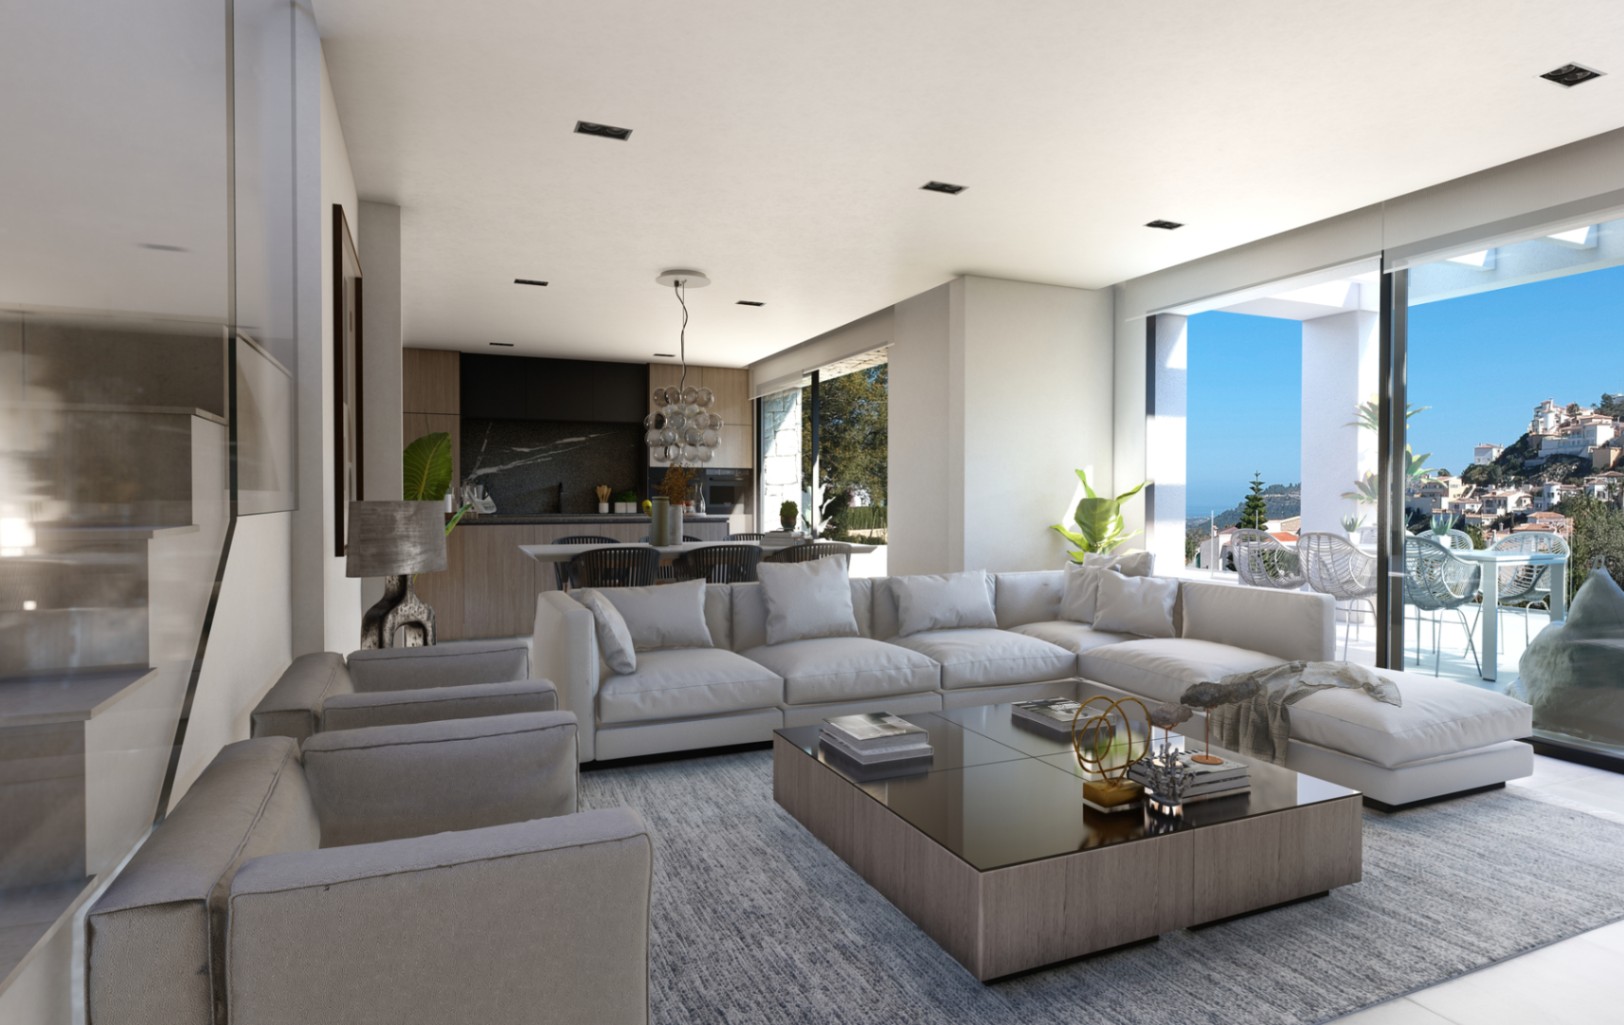 New build villa project for sale in Pedreguer, Costa Blanca